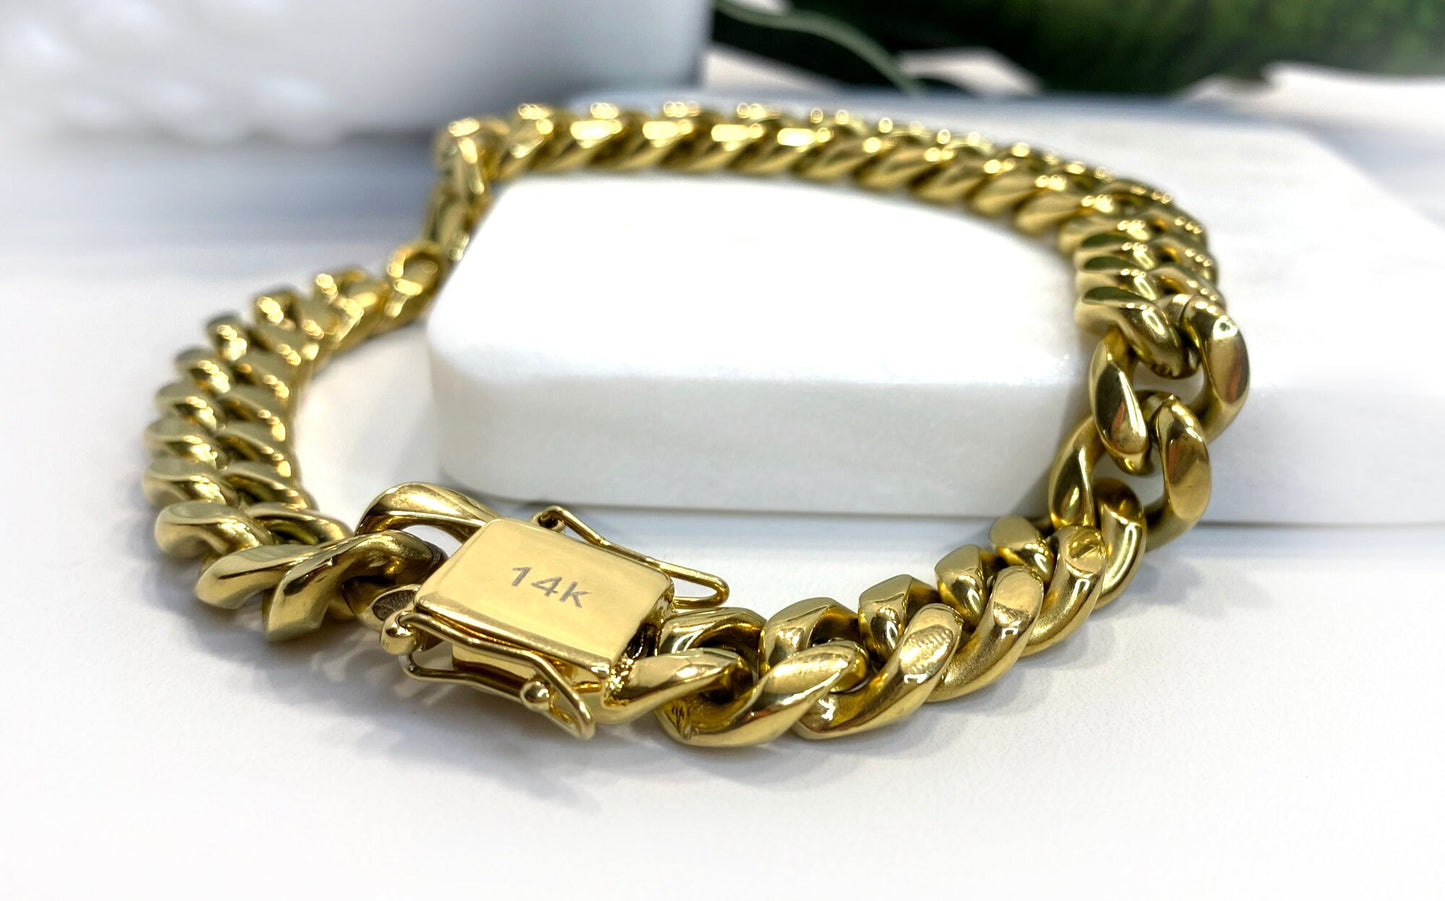 8mm Miami Cuban Link Bracelet In 14k Gold Filled Featuring Double Safety Lock Box Clasp, Unisex Curb Chain, Wholesale Jewelry Supplies